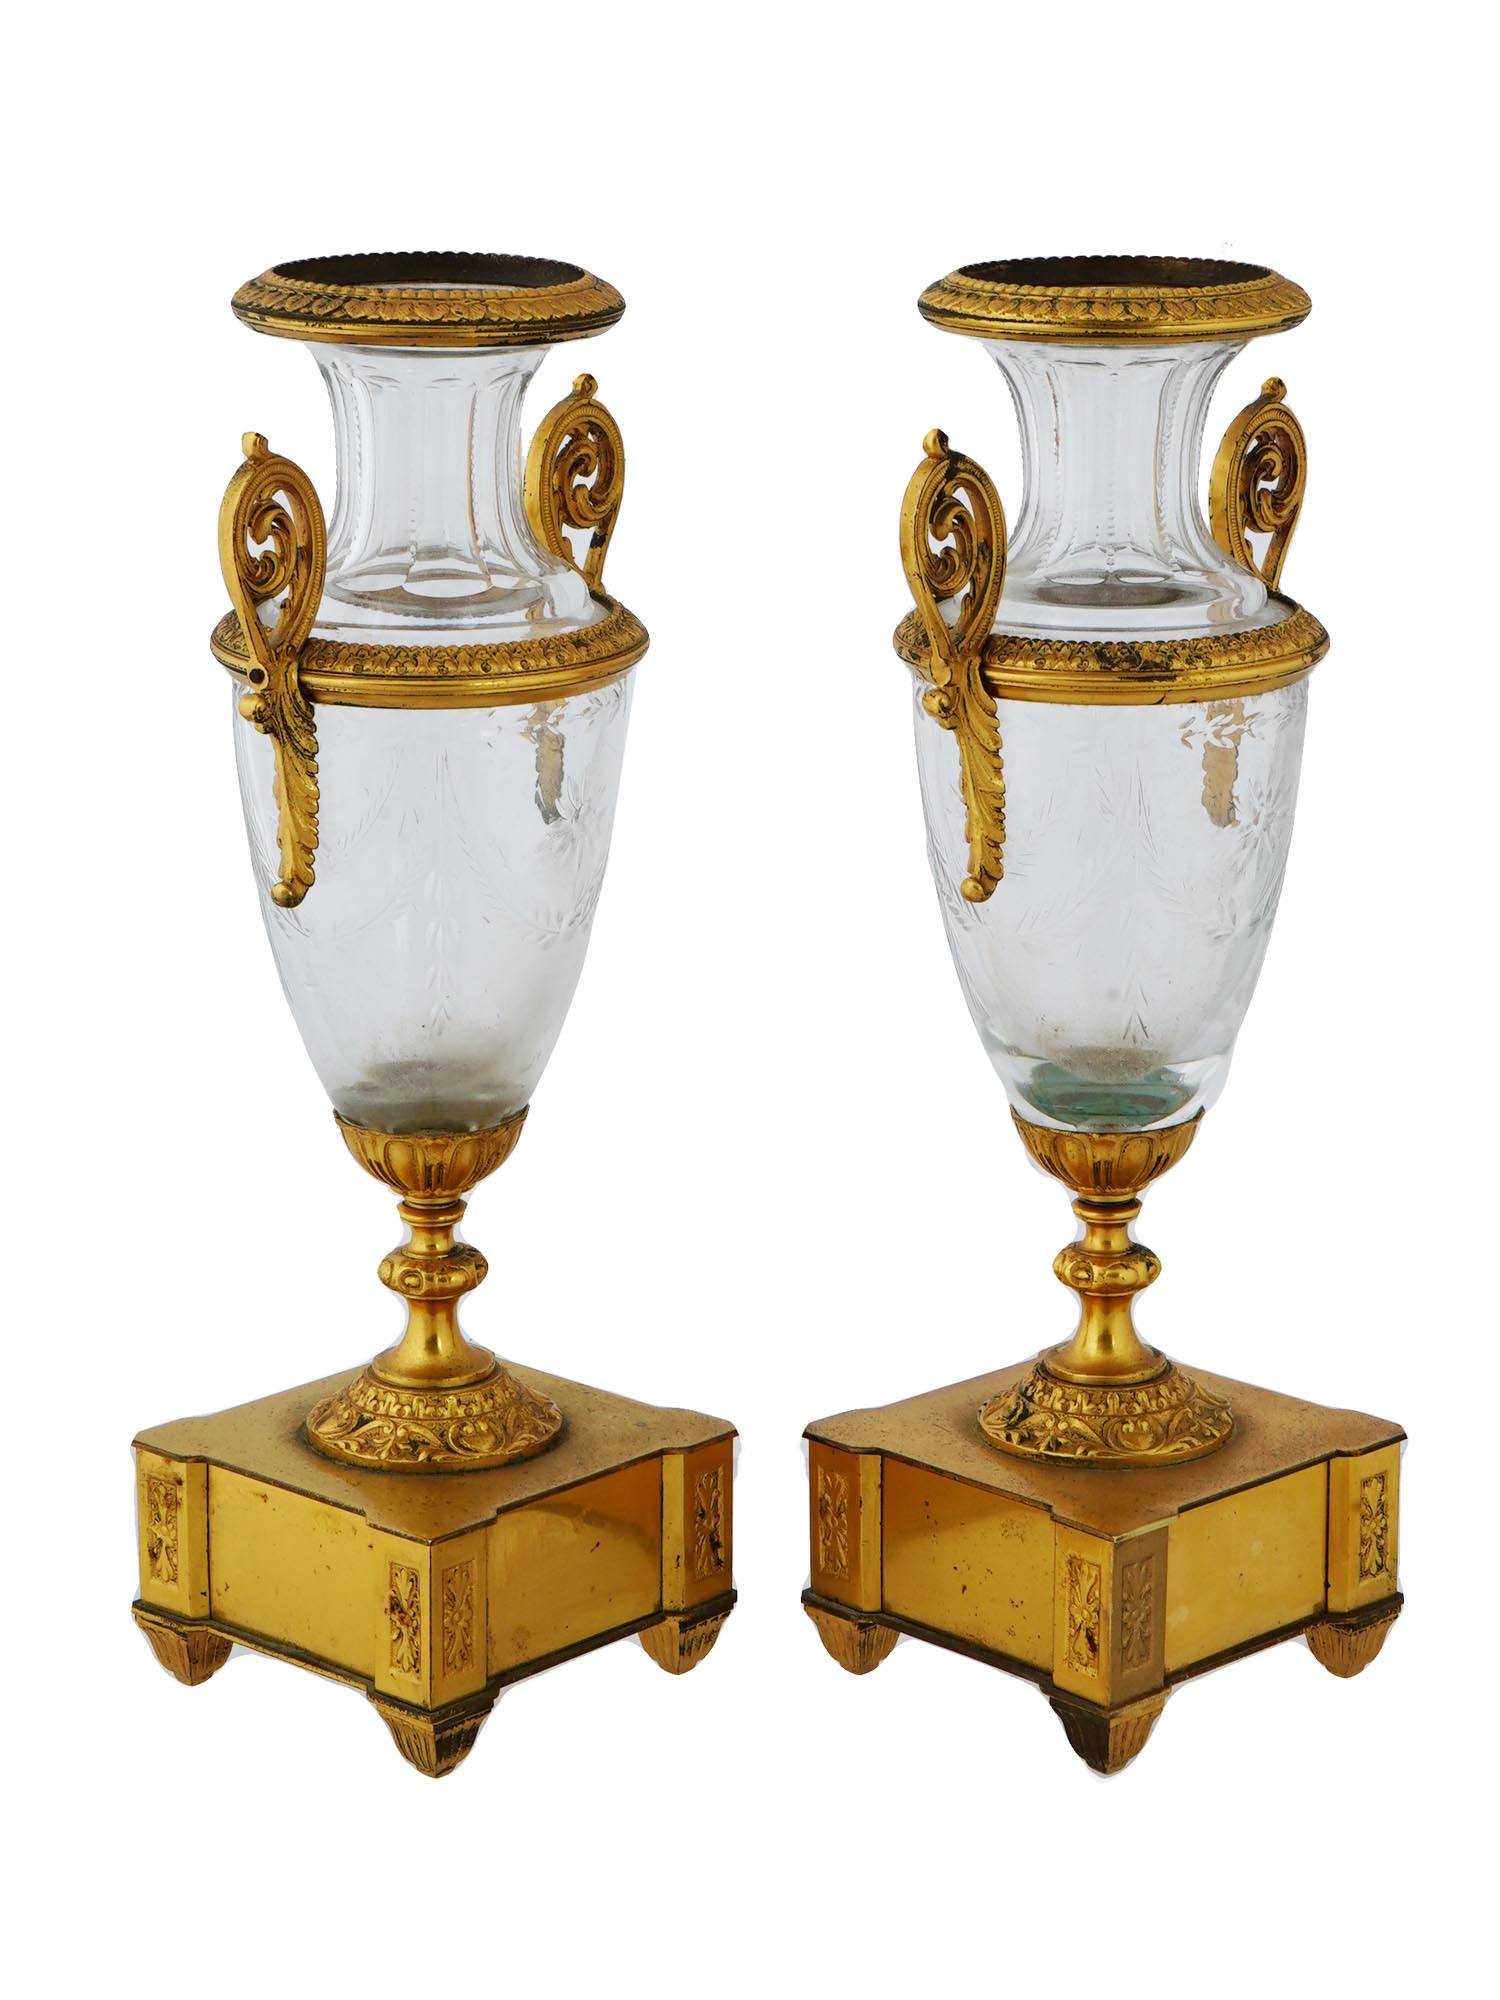 ANTIQUE FRENCH EMPIRE GILT BRONZE CRYSTAL VASES PIC-1